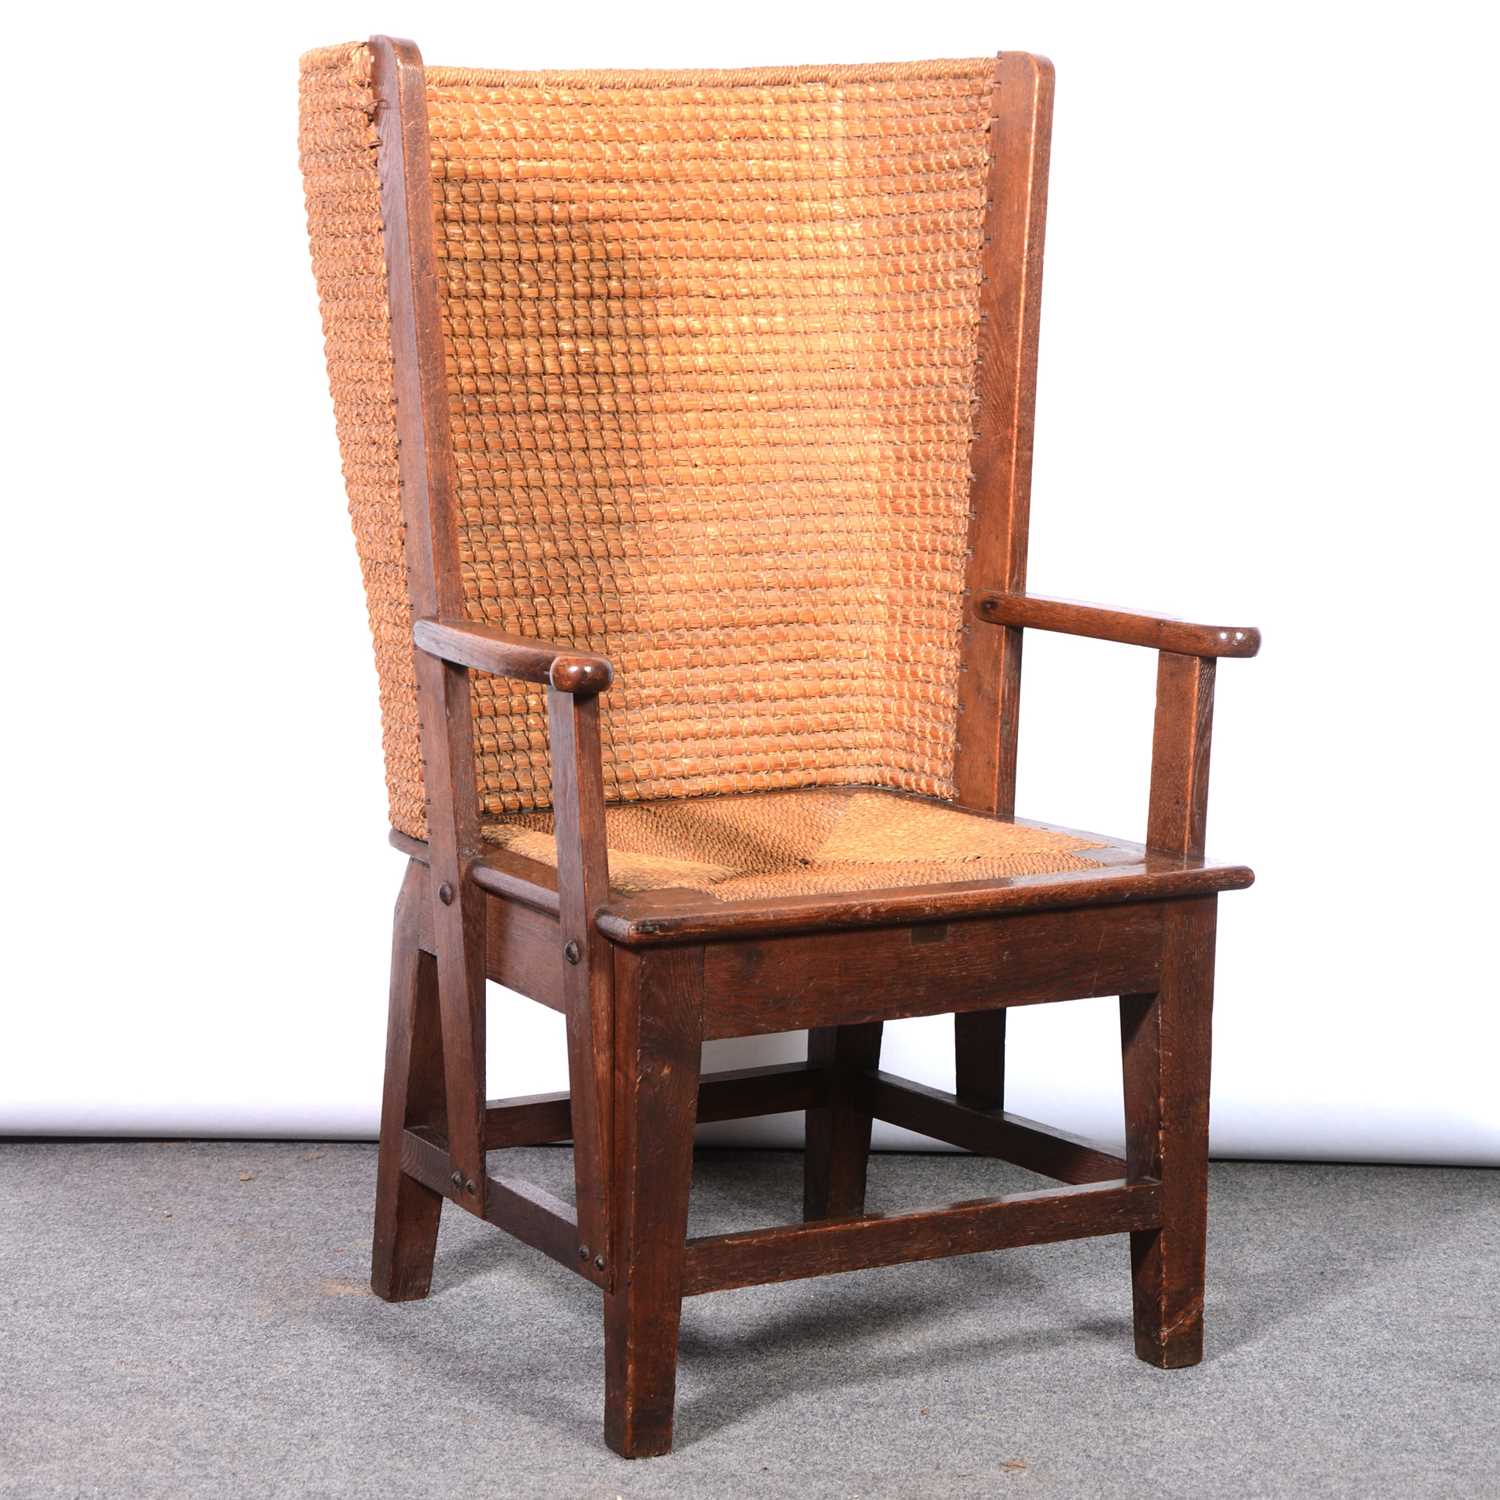 46 - David Munro Kirkness, an important Lady's Orkney chair, circa 1889